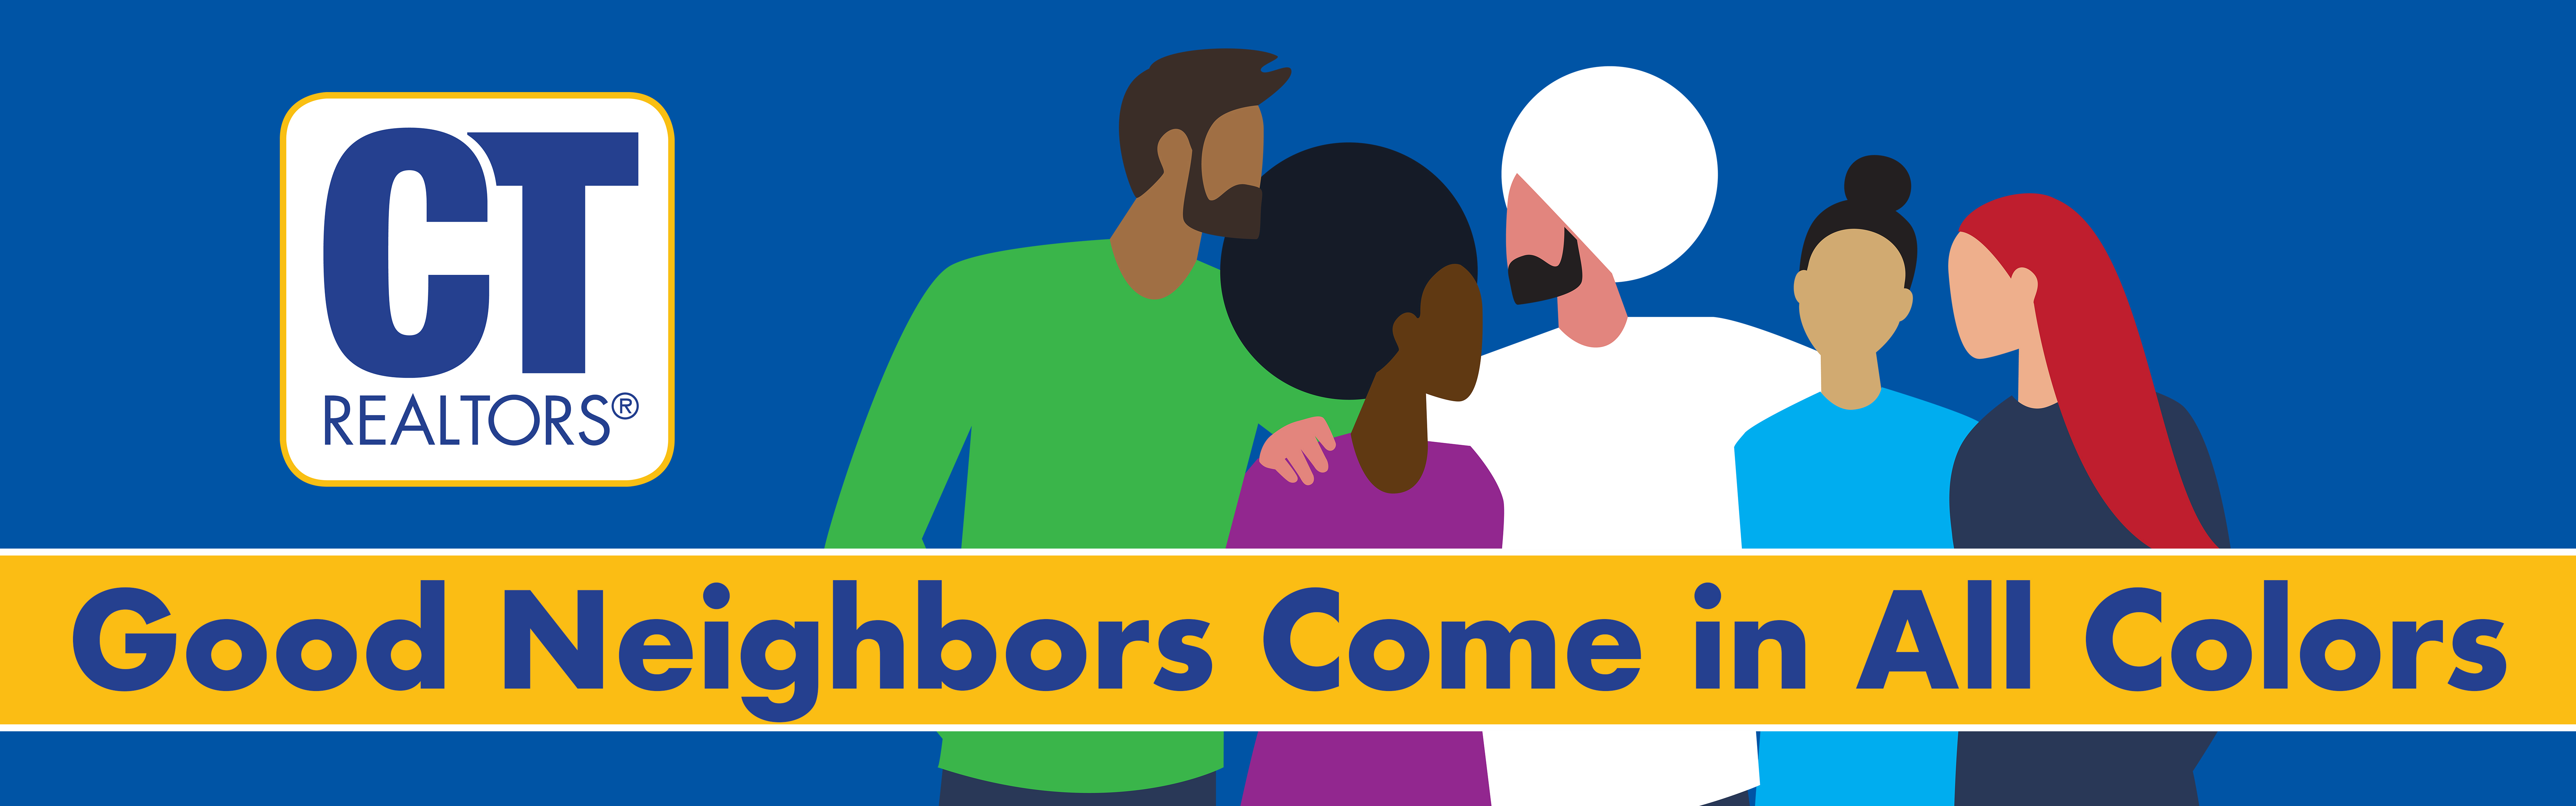 CTR Billboard: Good Neighbors Come in All Colors